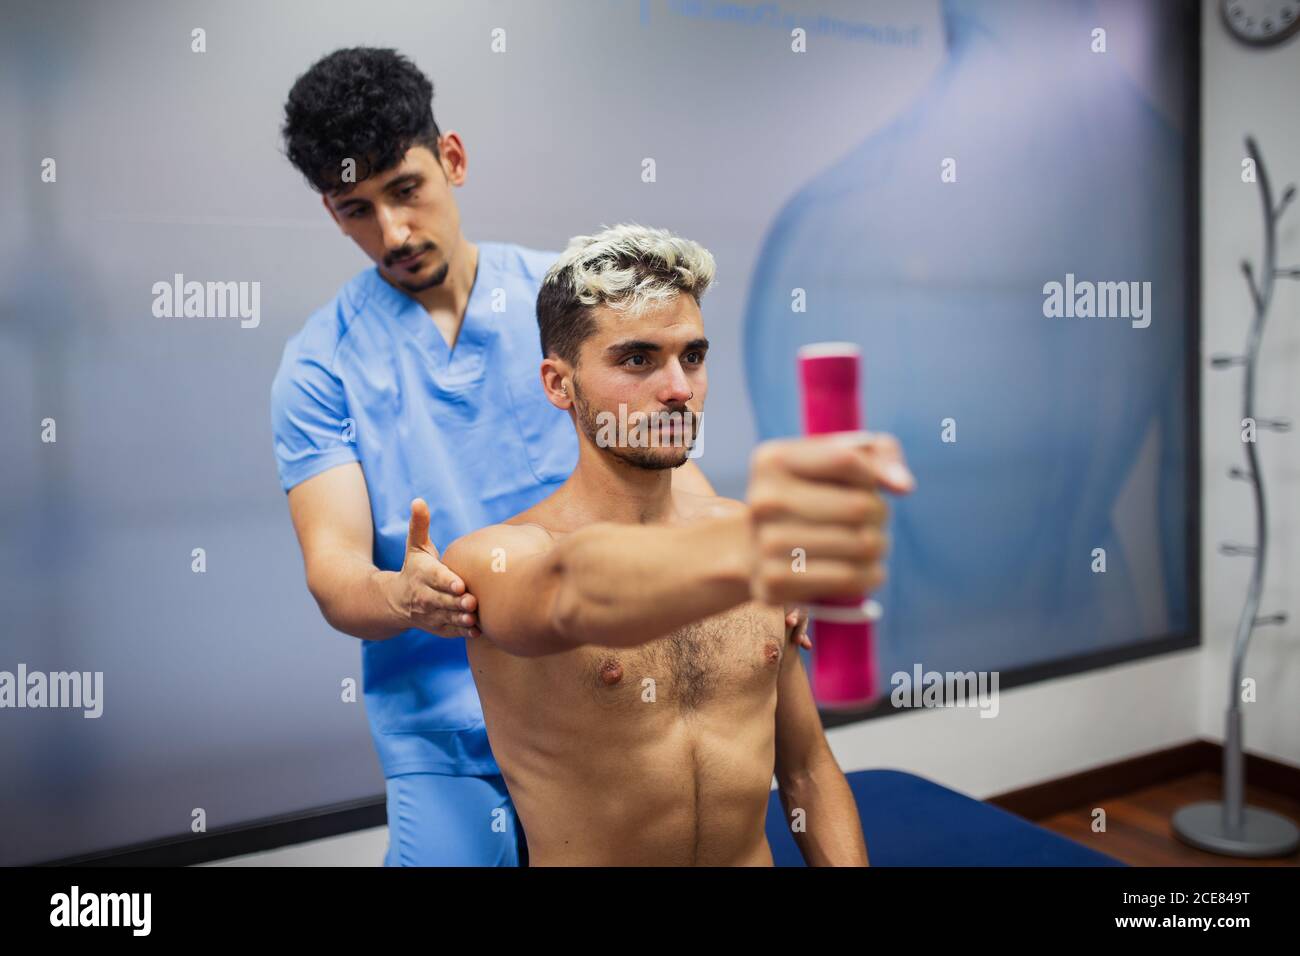 Serious sports medicine osteopath checking up shoulder of calm fit male with dyed hair sitting with reached arm and holding dumbbell during rehabilitation process and looking away Stock Photo